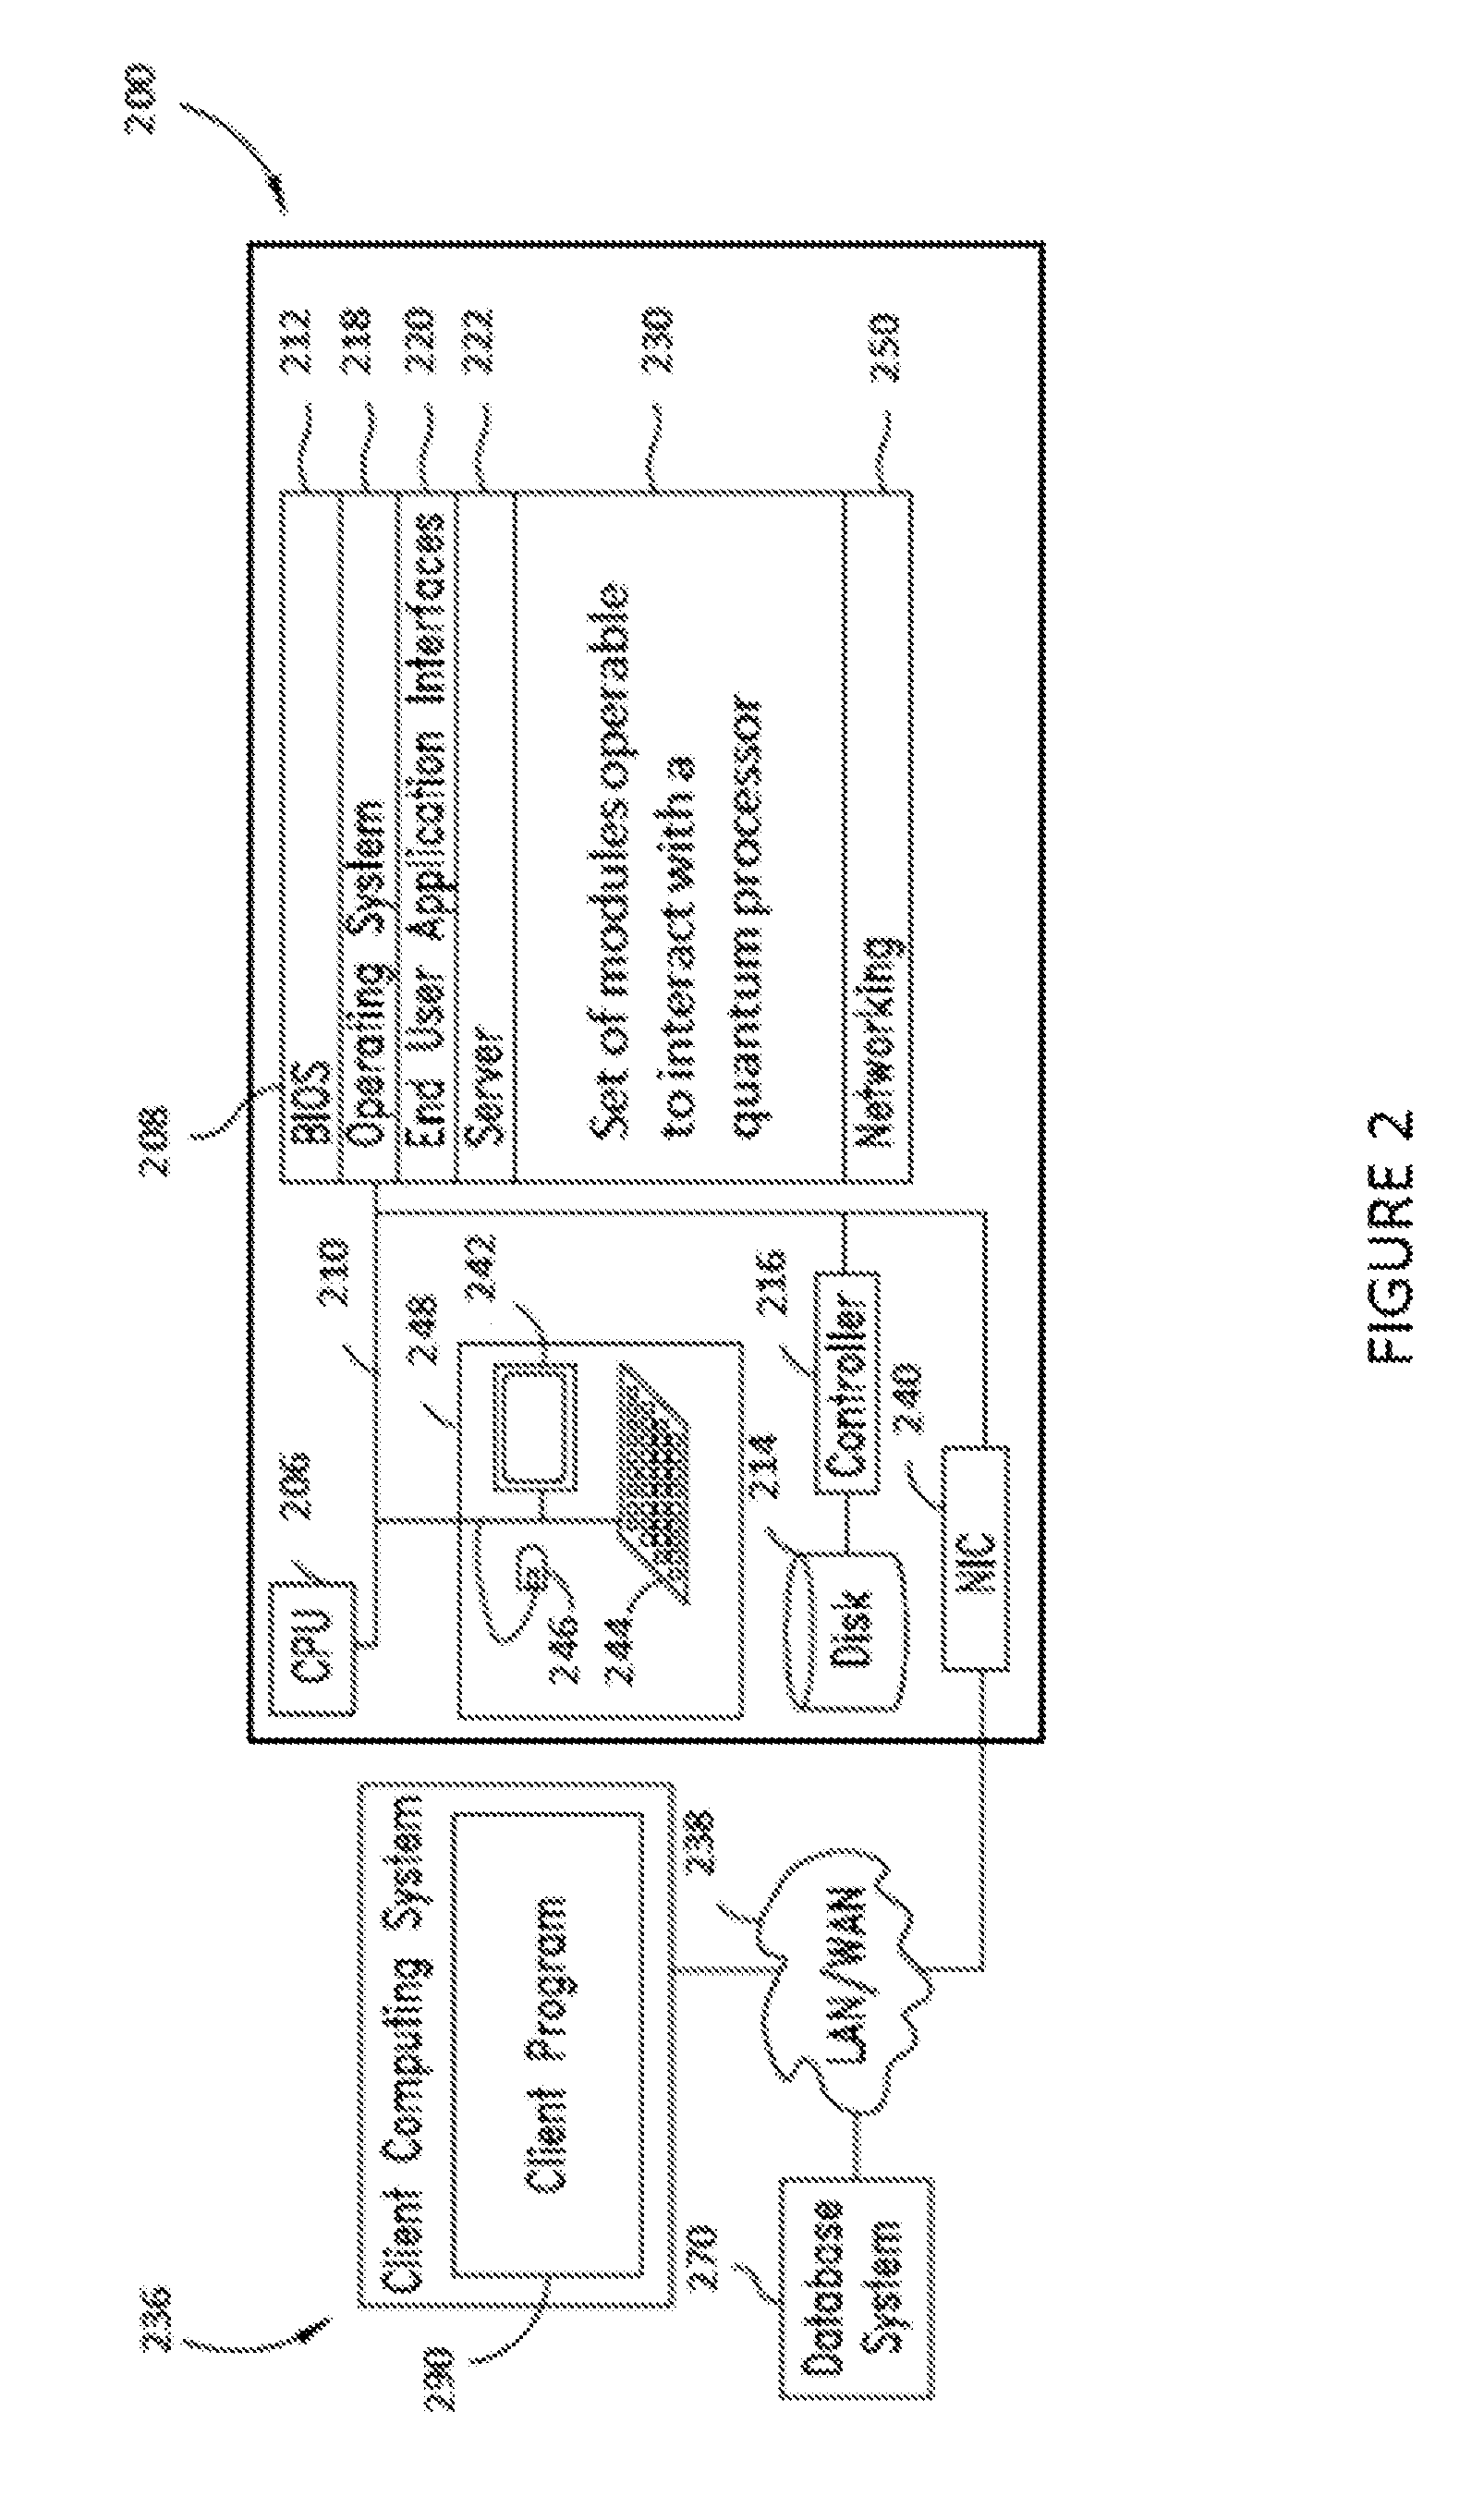 Quantum processor based systems and methods that minimize a continuous variable objective function